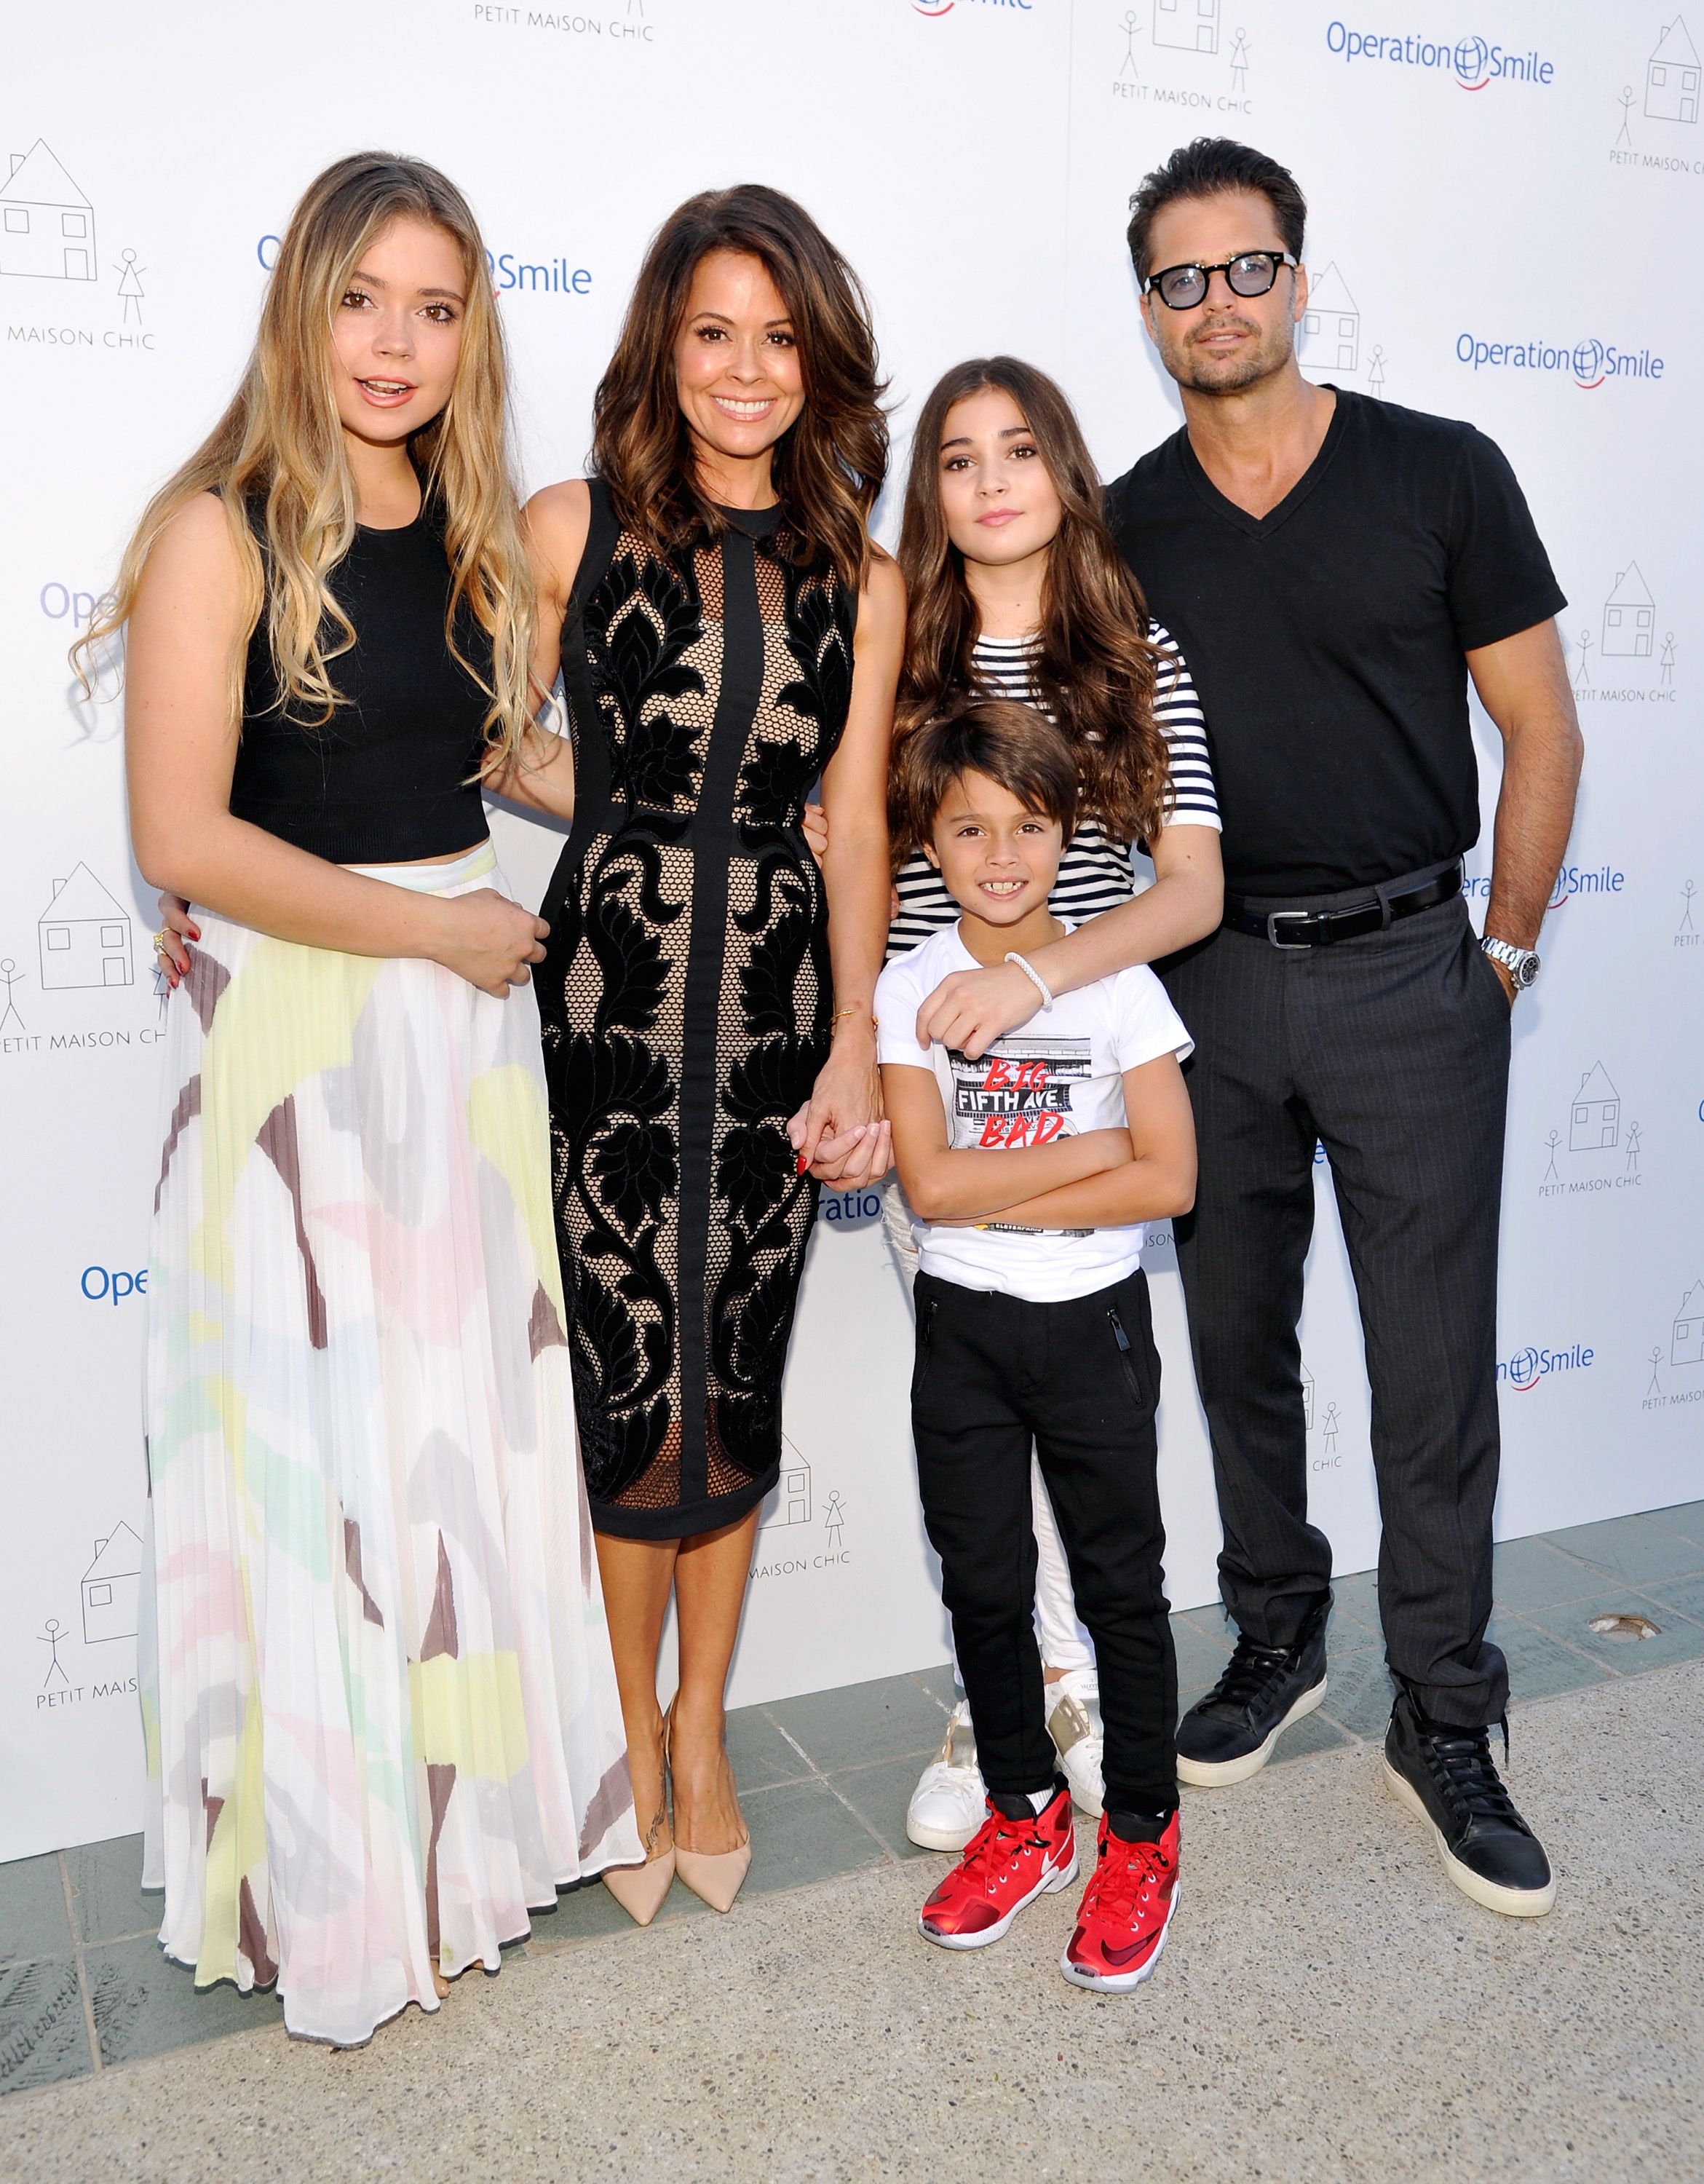 Neriah Fisher, actress Brooke Burke-Charvet, Shaya Charvet, Sierra Fisher and actor David Charvet at the Petit Maison Chic fashion show honoring Operation Smile on November 21, 2015 | Photo: Getty Images